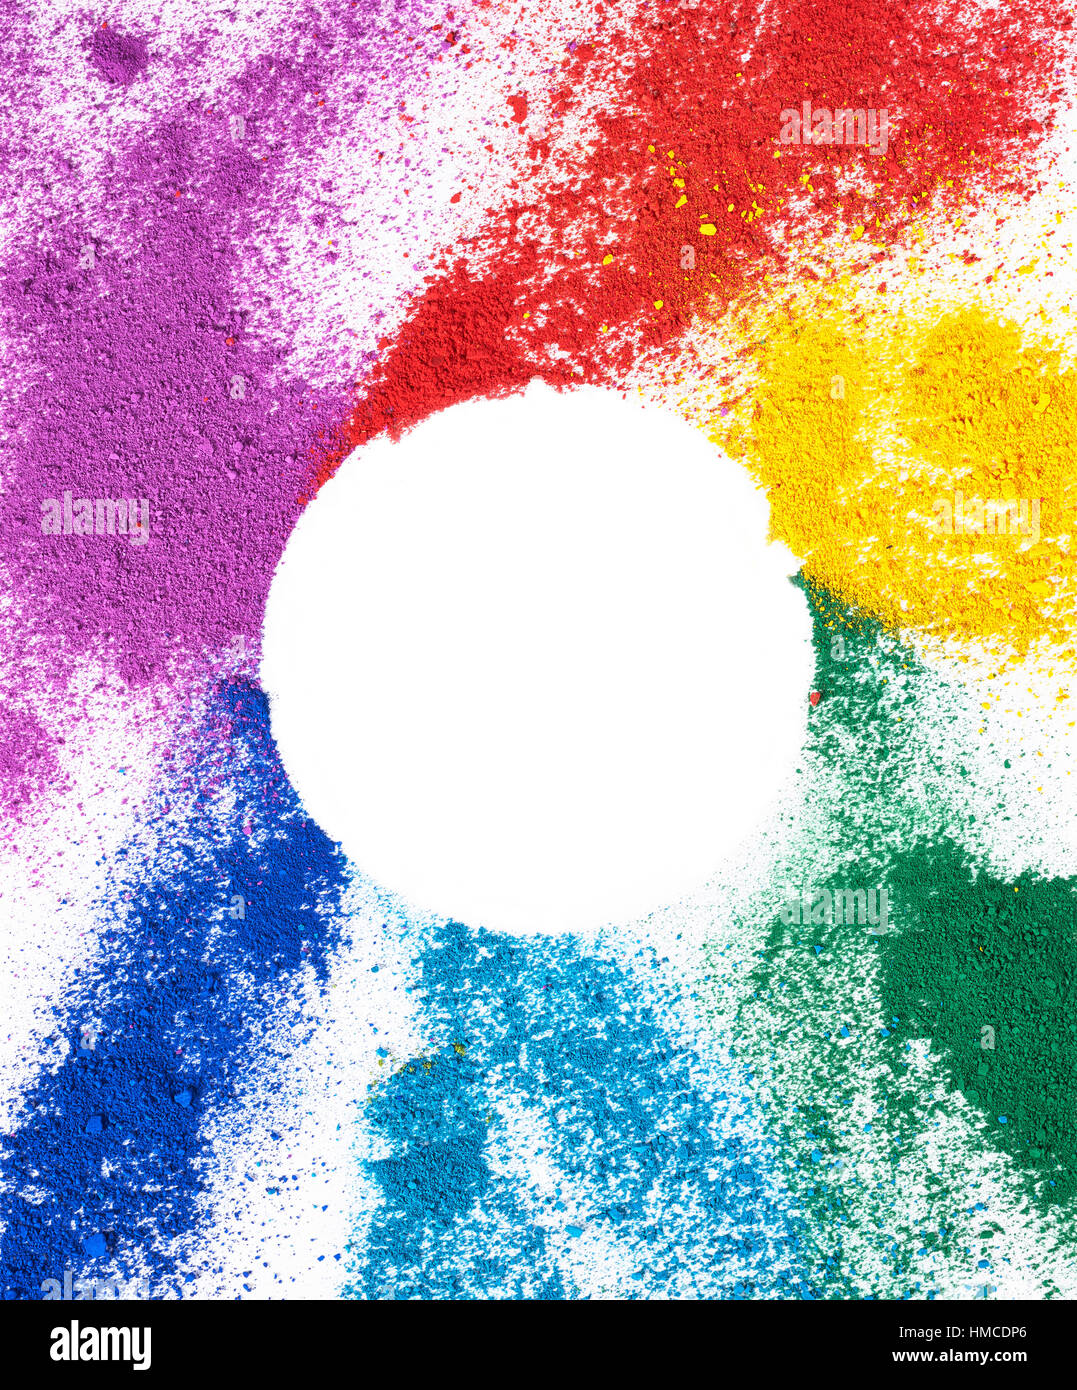 Bright coloured powders on a plain white background with a white circle in the centre of the image. Stock Photo